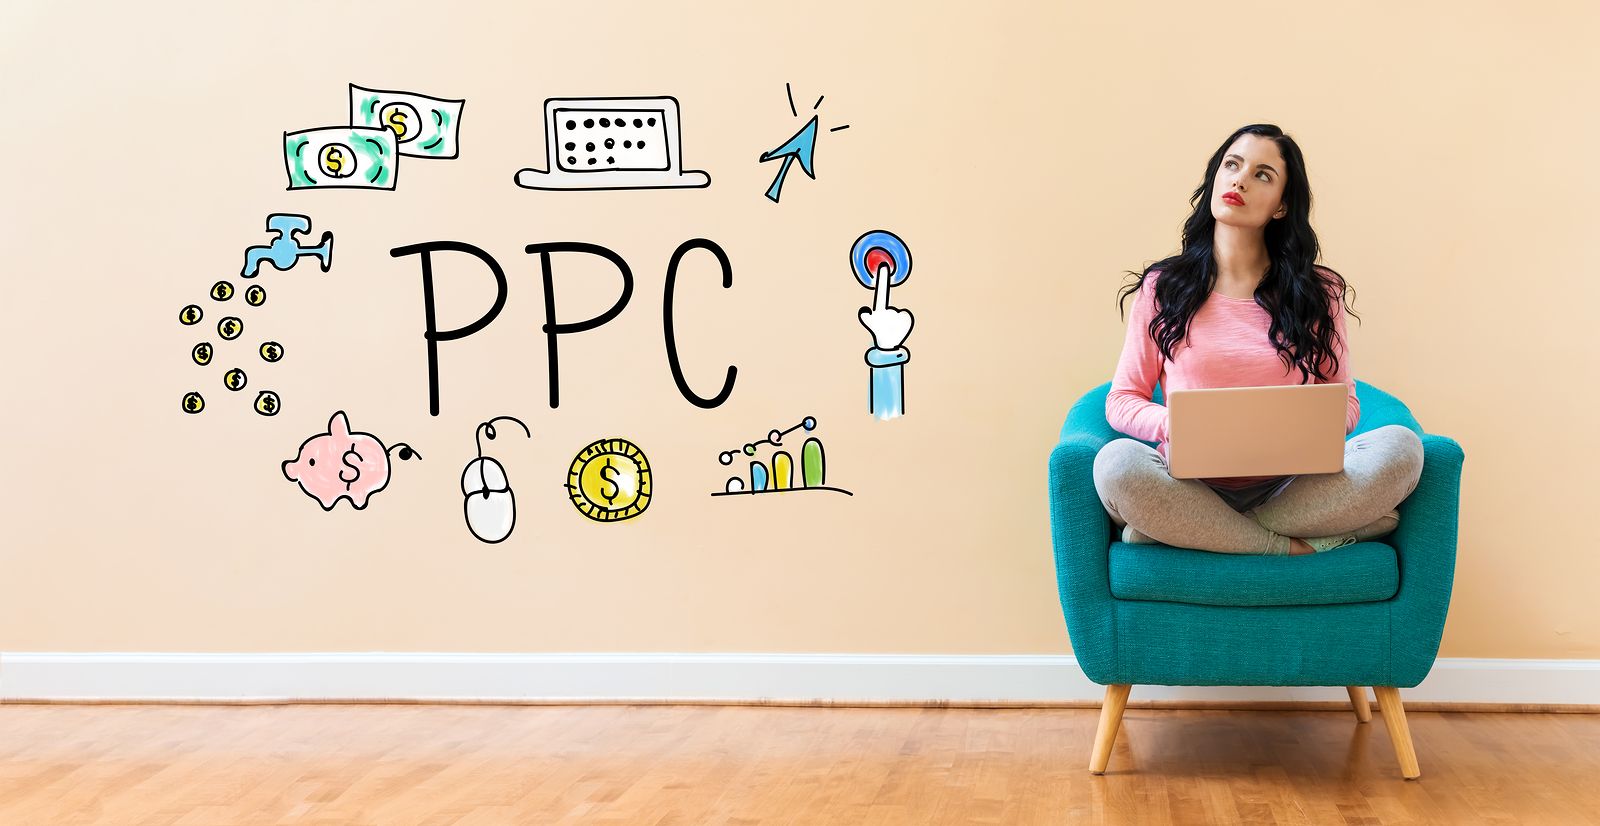 How to Get a Job in Ppc Marketing?